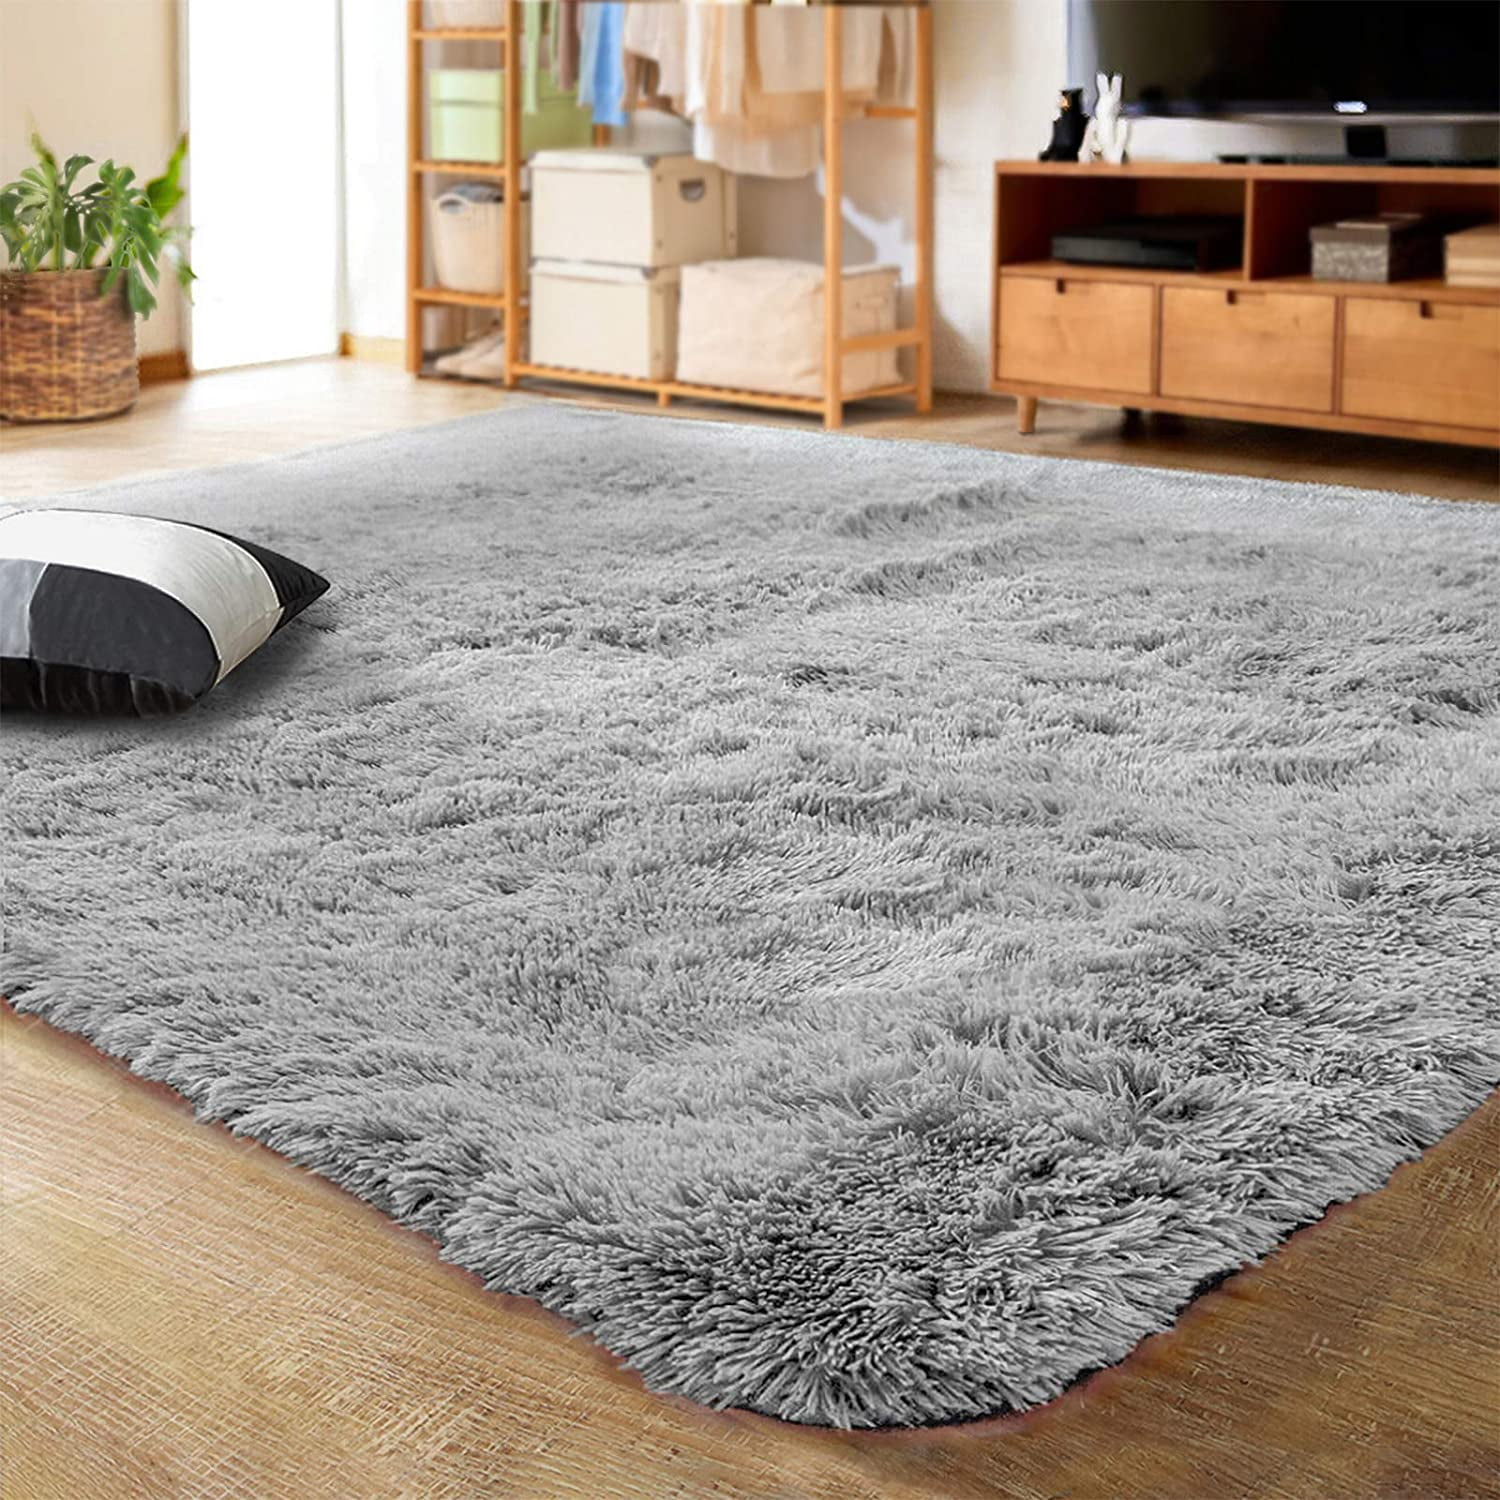 Fluffy Shaggy Rug Modern Super Soft Thick Pile Rugs Living Room Rugs  Bedroom Rug